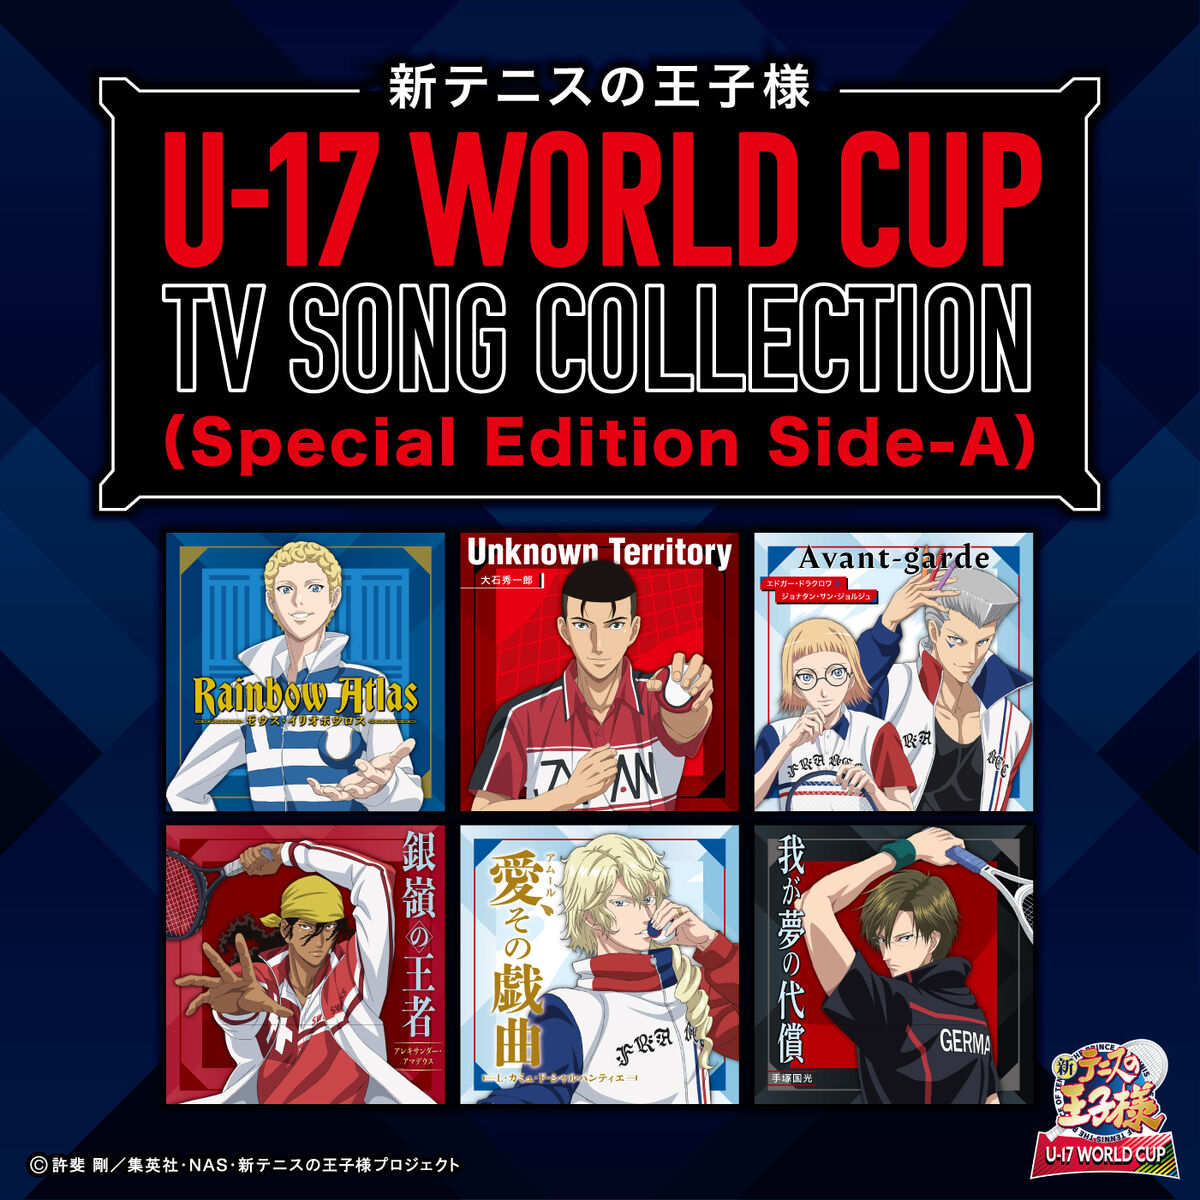 U-17 World Cup TV Song Collection | Prince of Tennis Wiki | Fandom